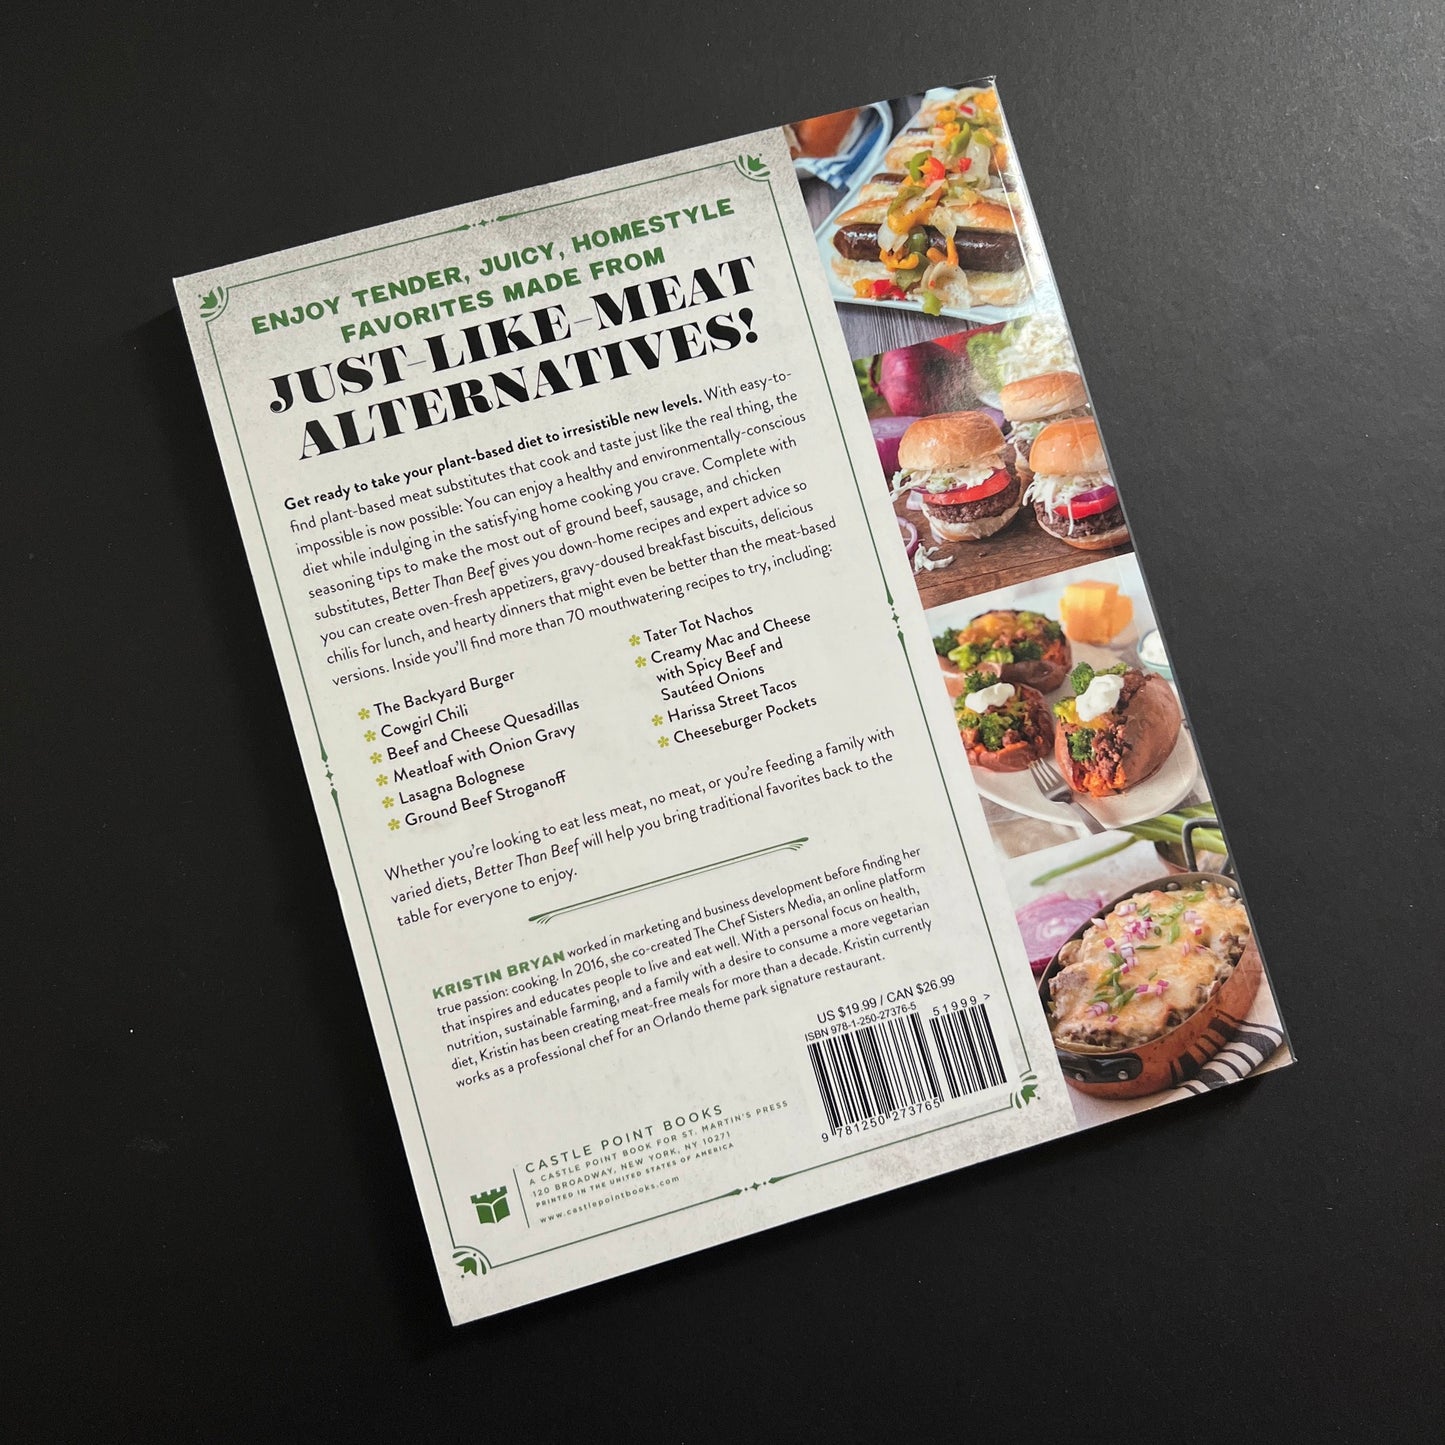 Better Than Beef: The Plant-Based Meat Comfort Food Cookbook